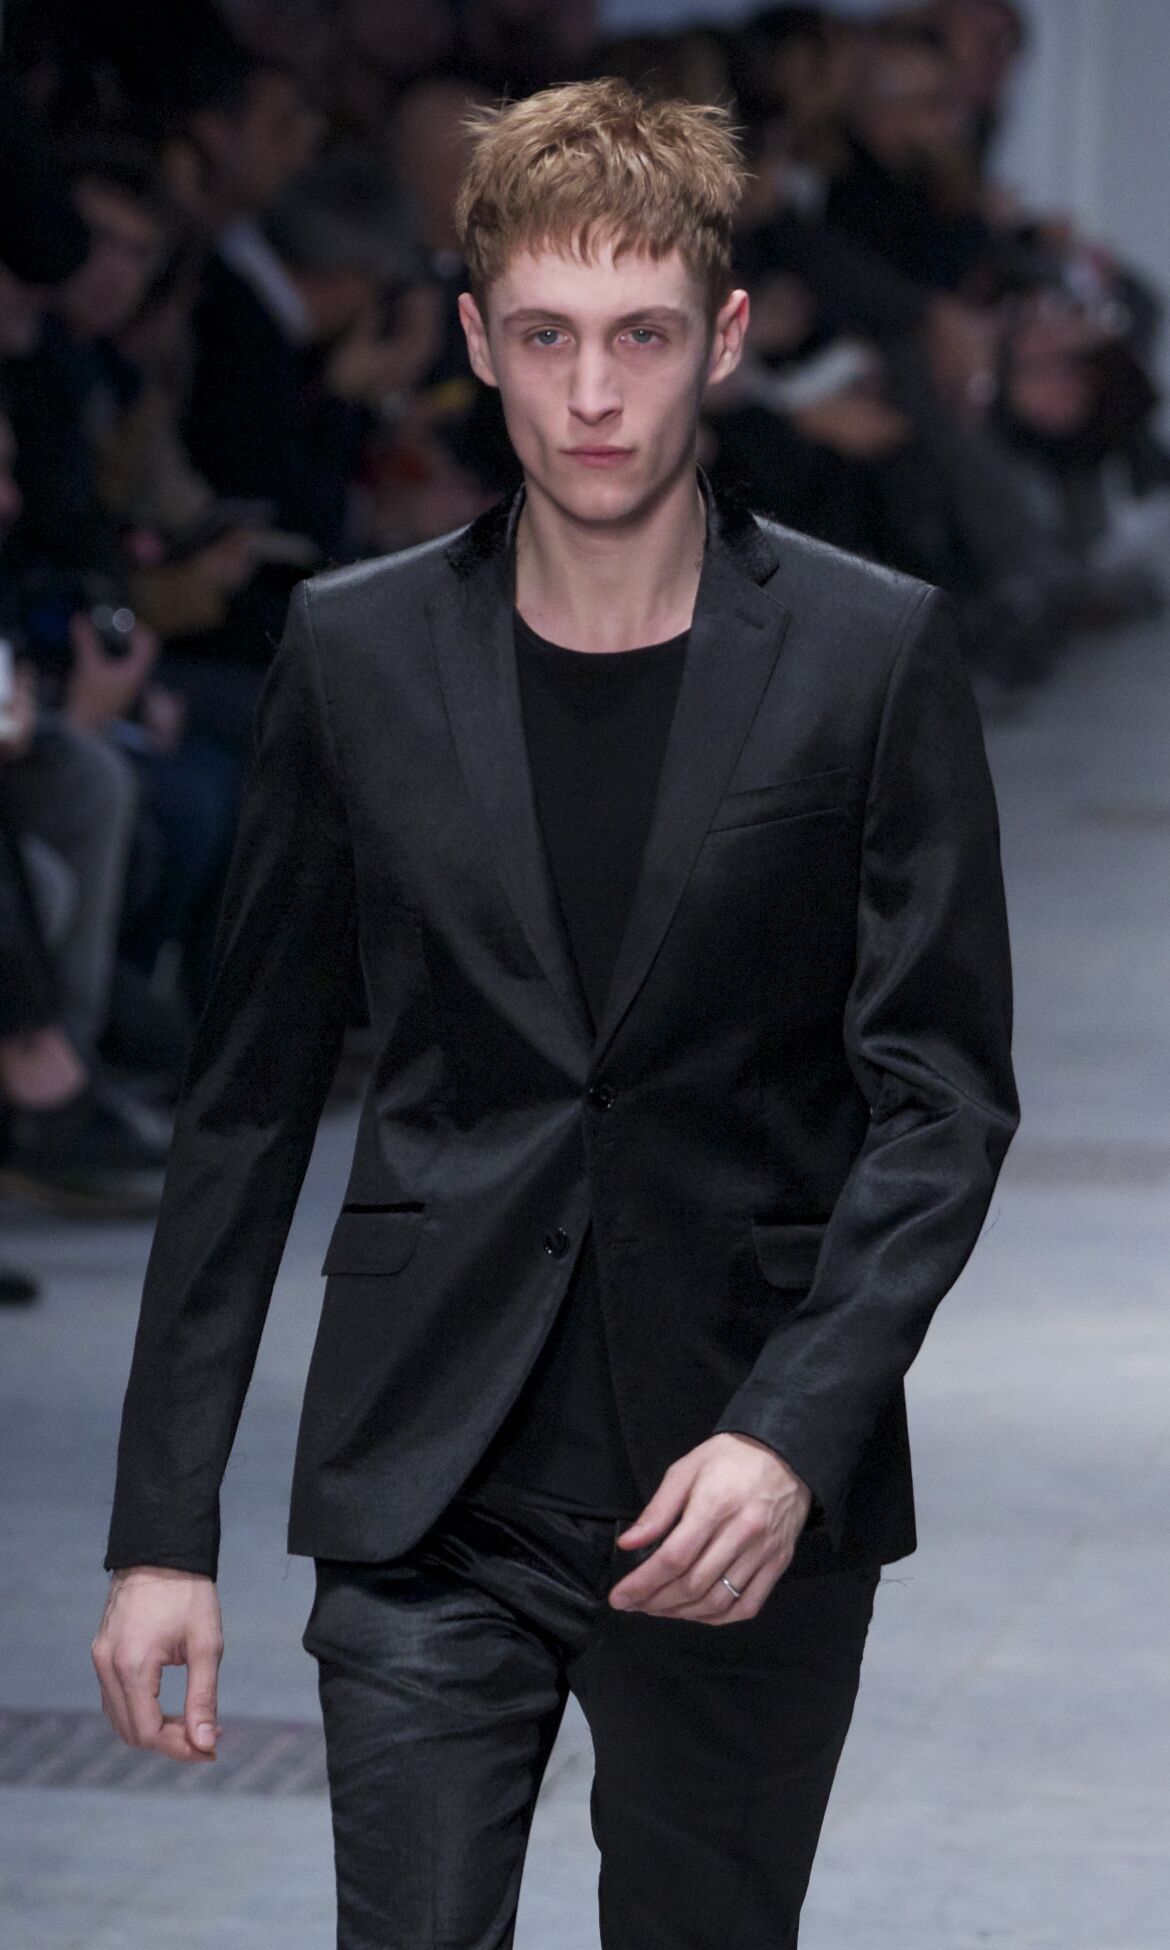 COSTUME NATIONAL HOMME FALL WINTER 2013 - MILANO FASHION WEEK | The ...